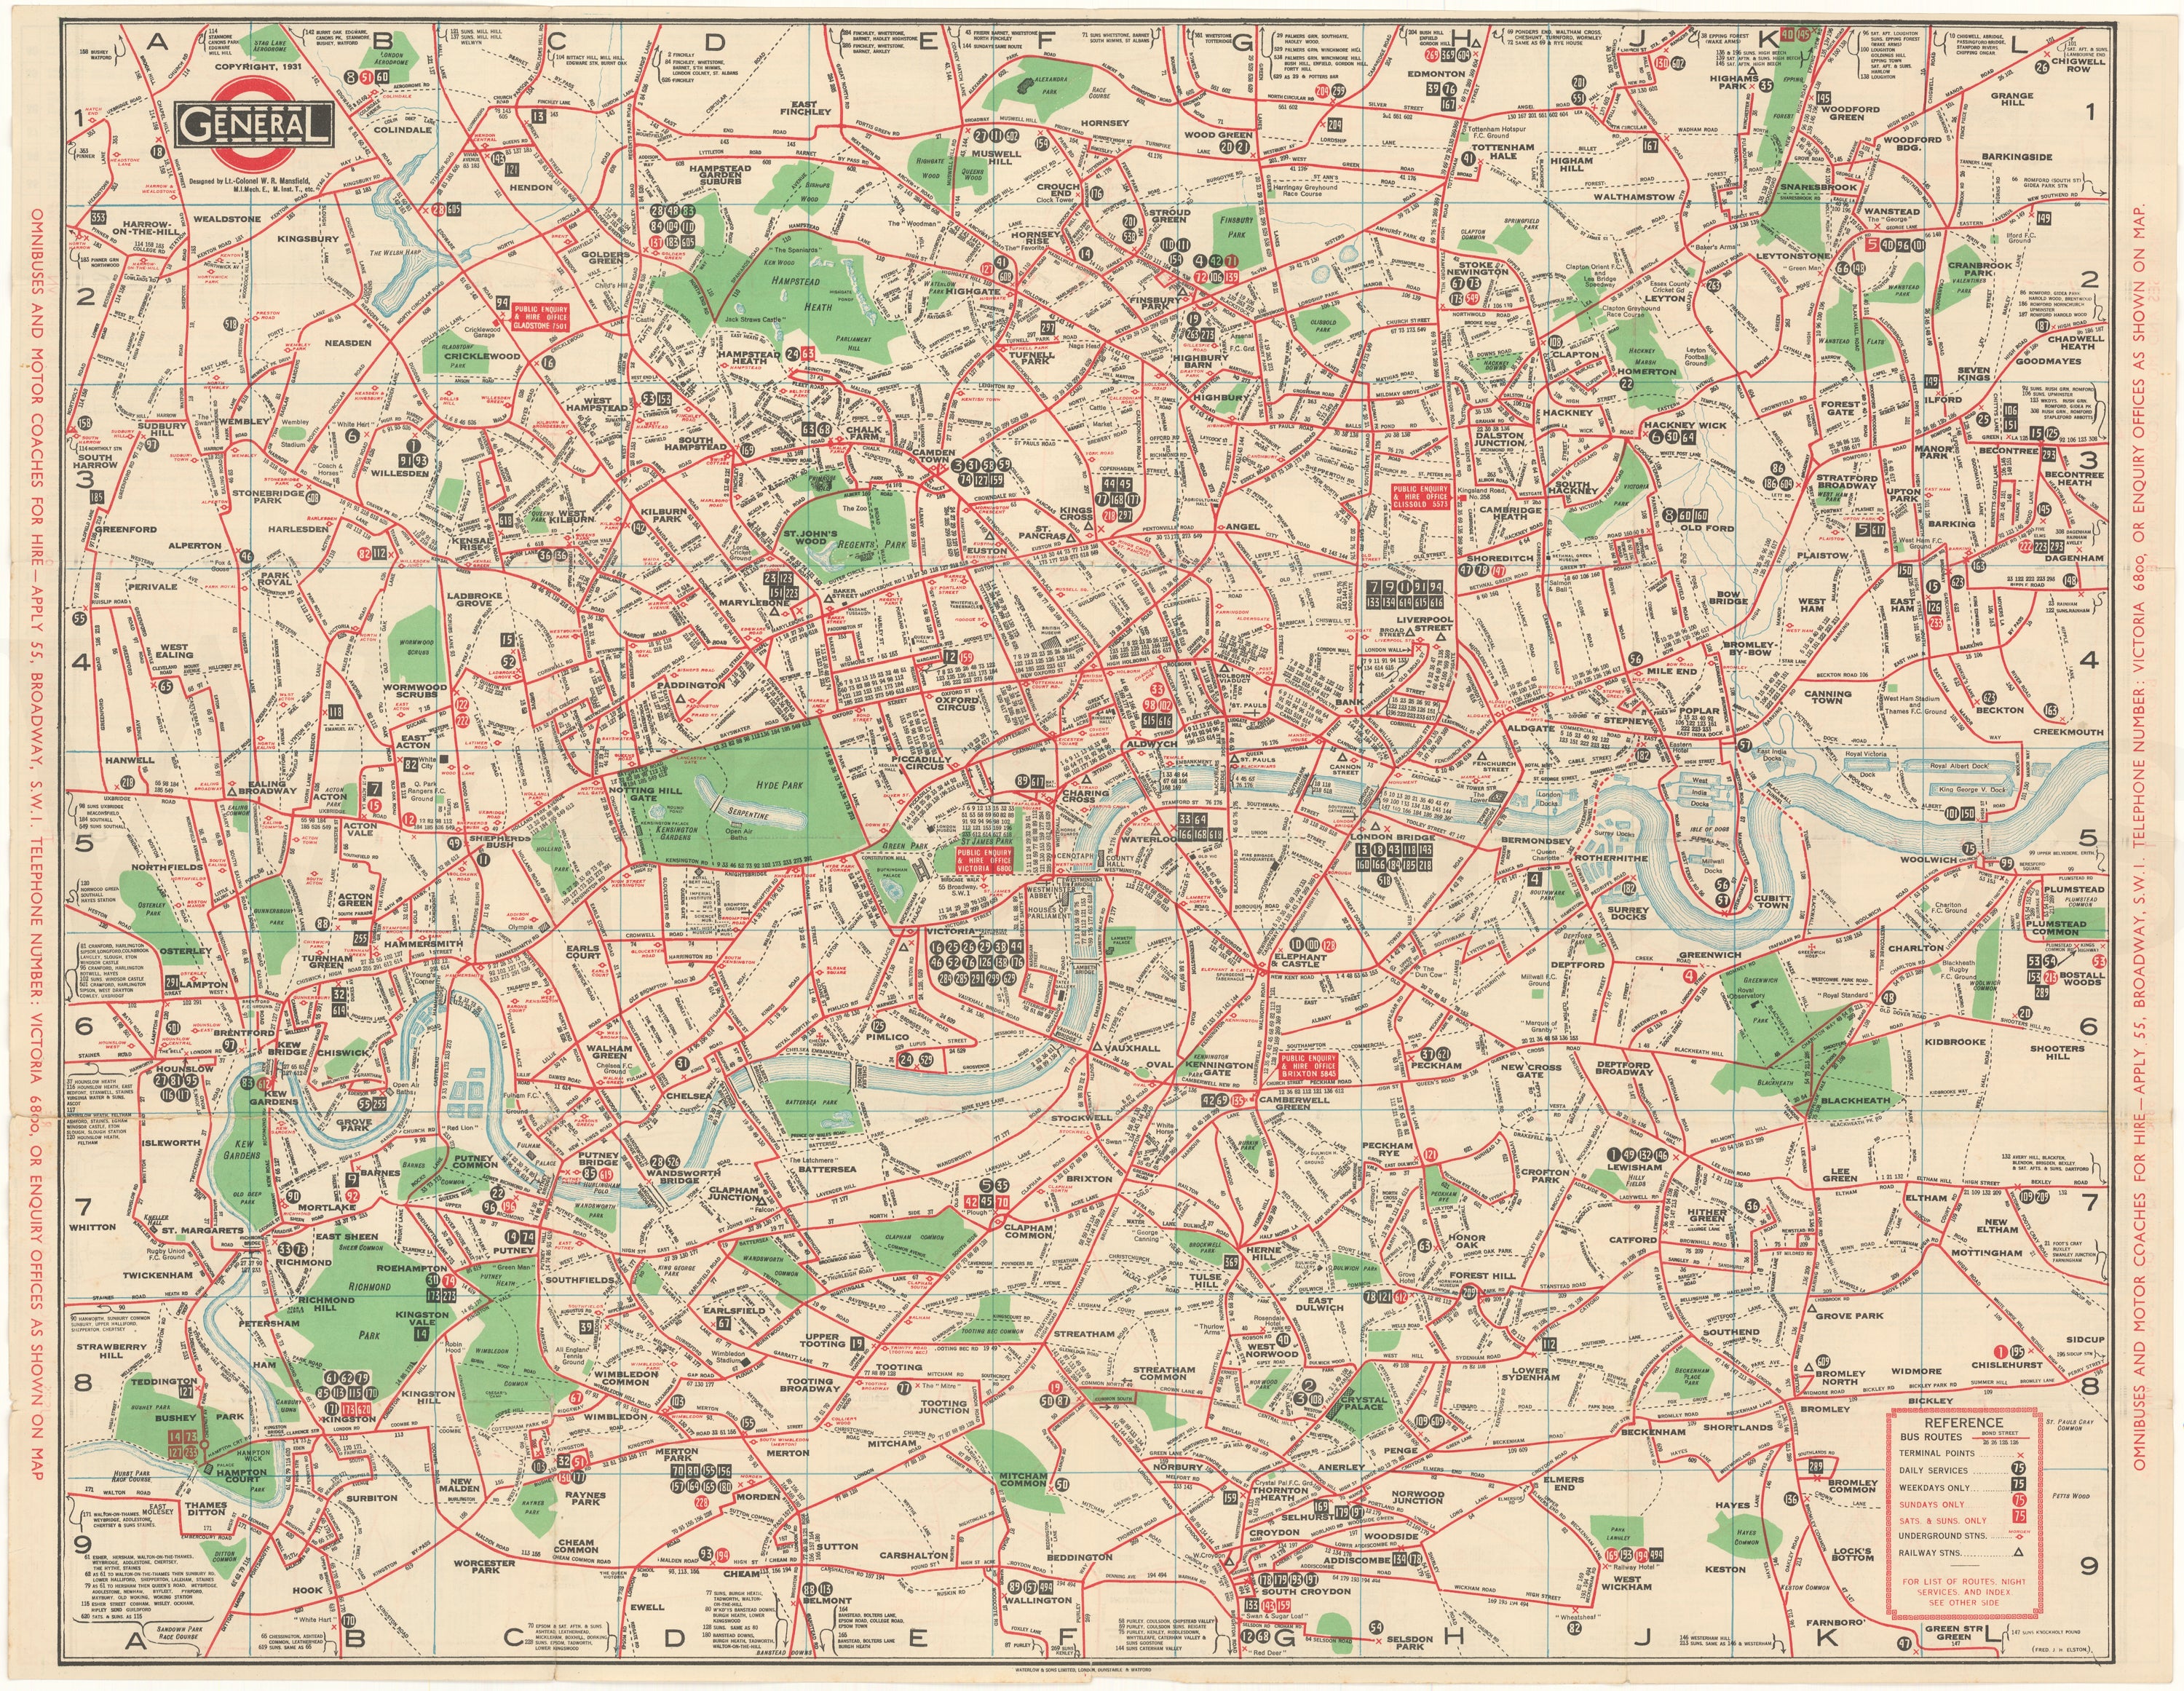 London, England 1931: General Routes